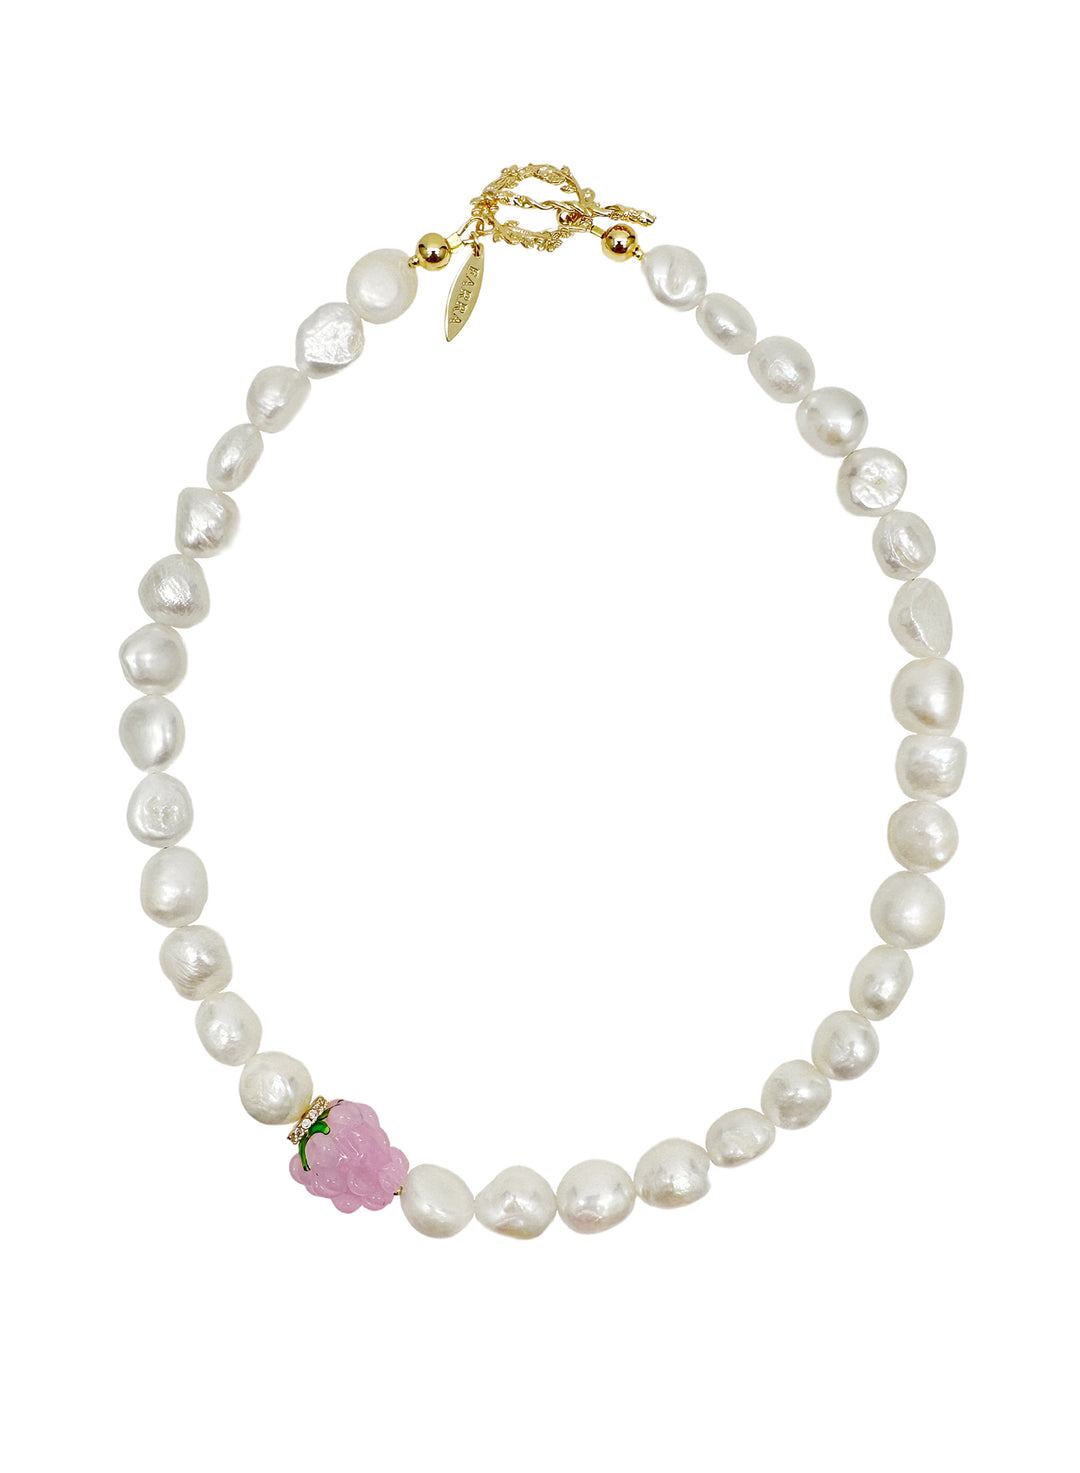 Irregular Shaped Freshwater Pearls with Pink Raspberry Necklace LN009 - FARRA